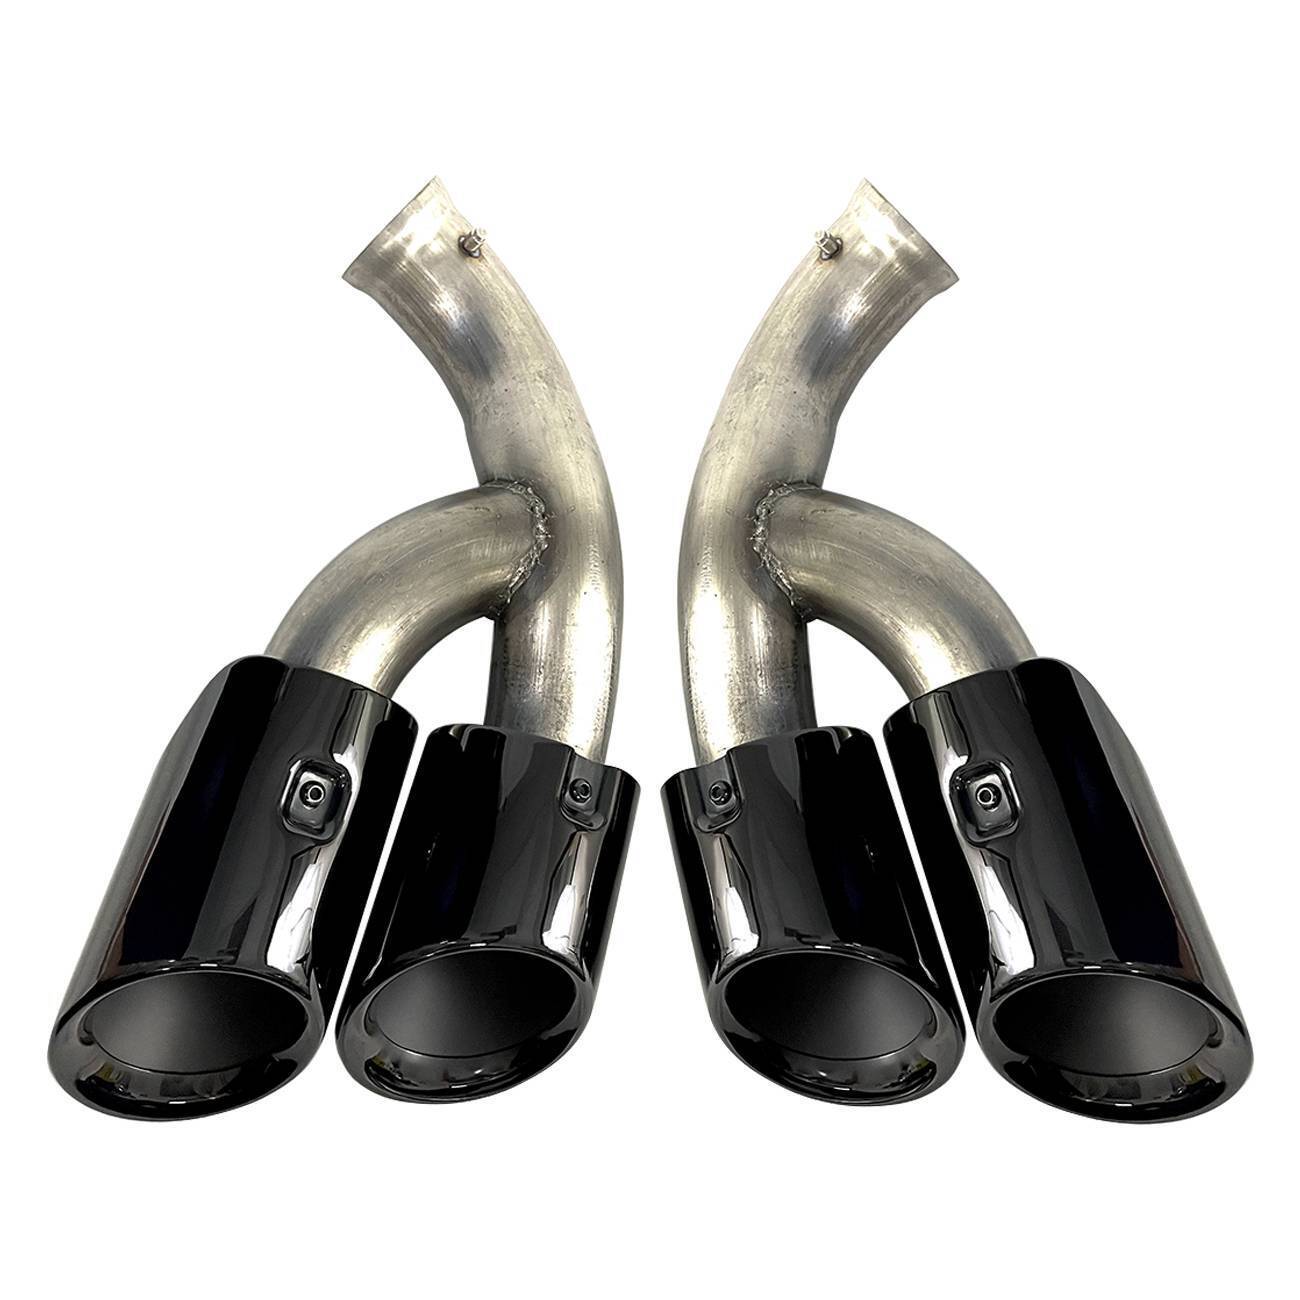 LH&RH Muffler Tail Tip Exhaust Pipe For 2014+ Cayenne Round 958 Stainless Steel